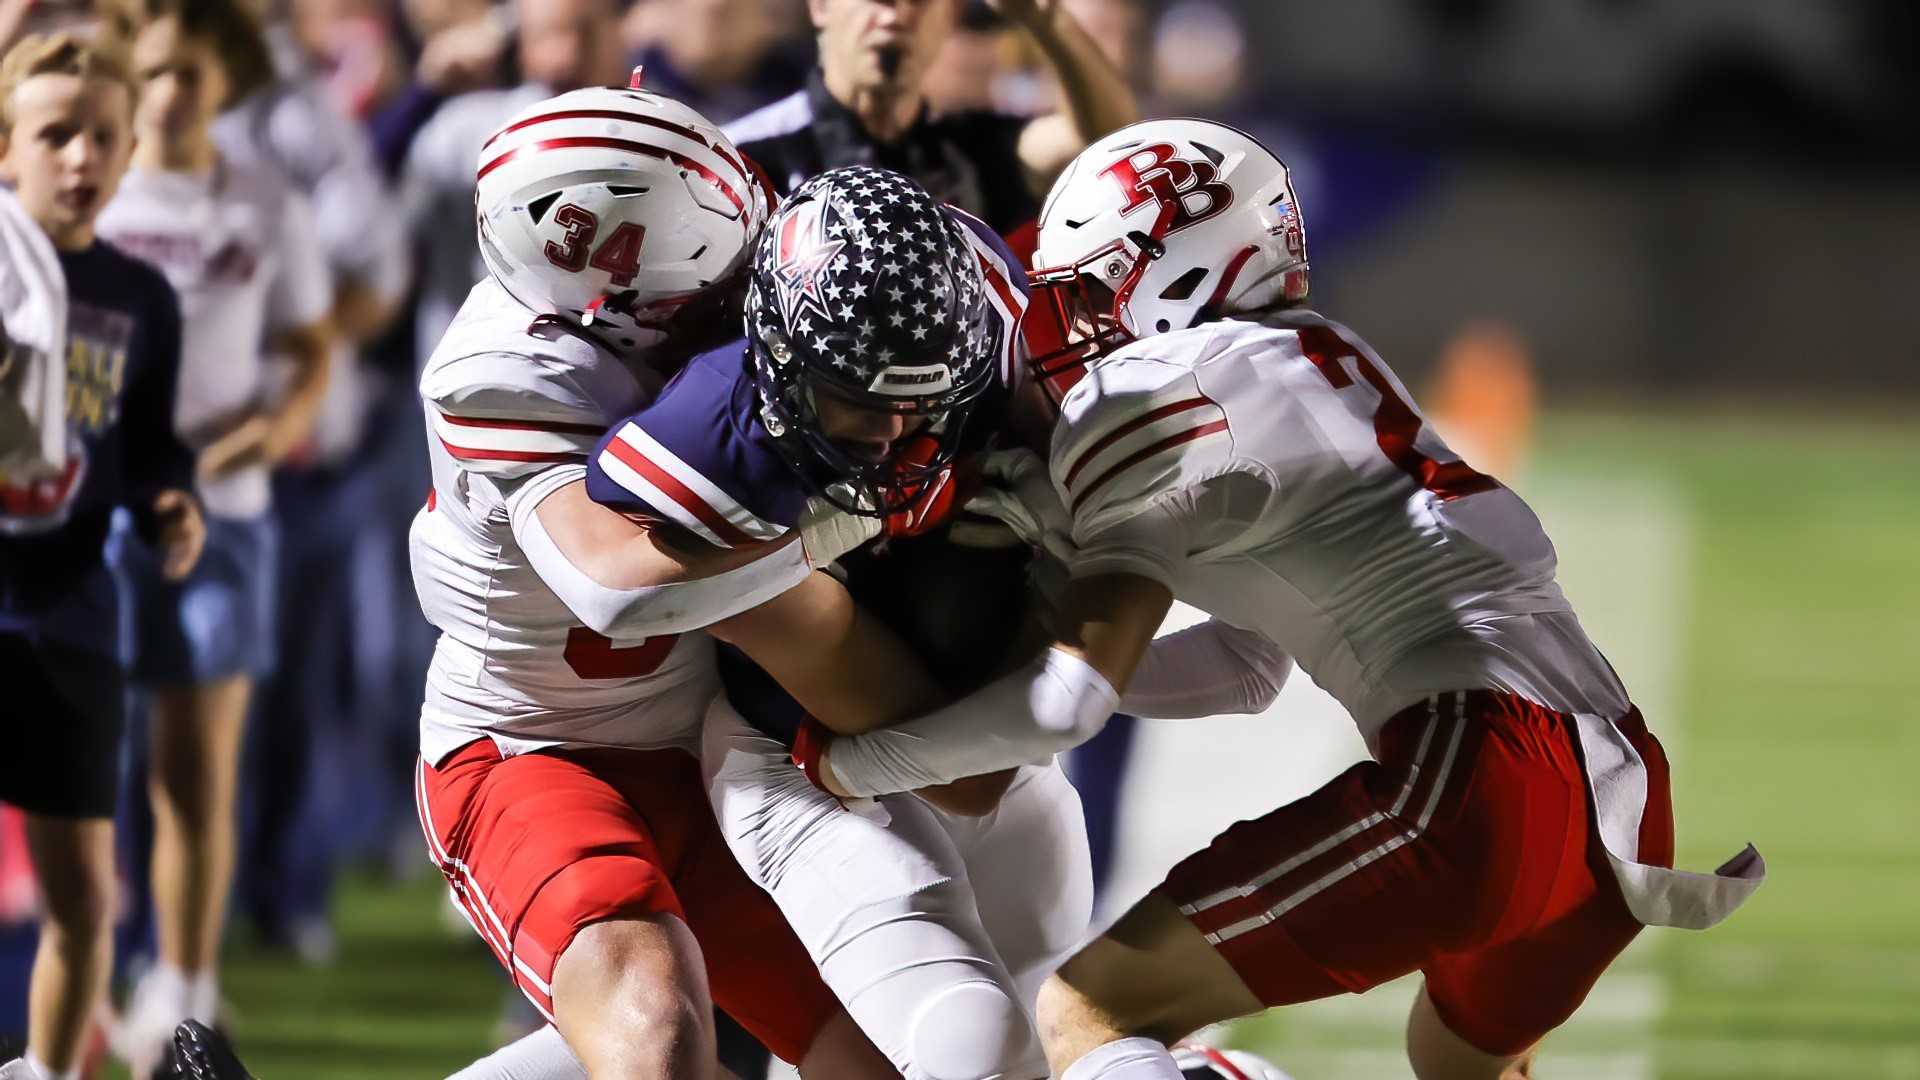 Texas UIL Football Playoffs Scores for South Texas teams